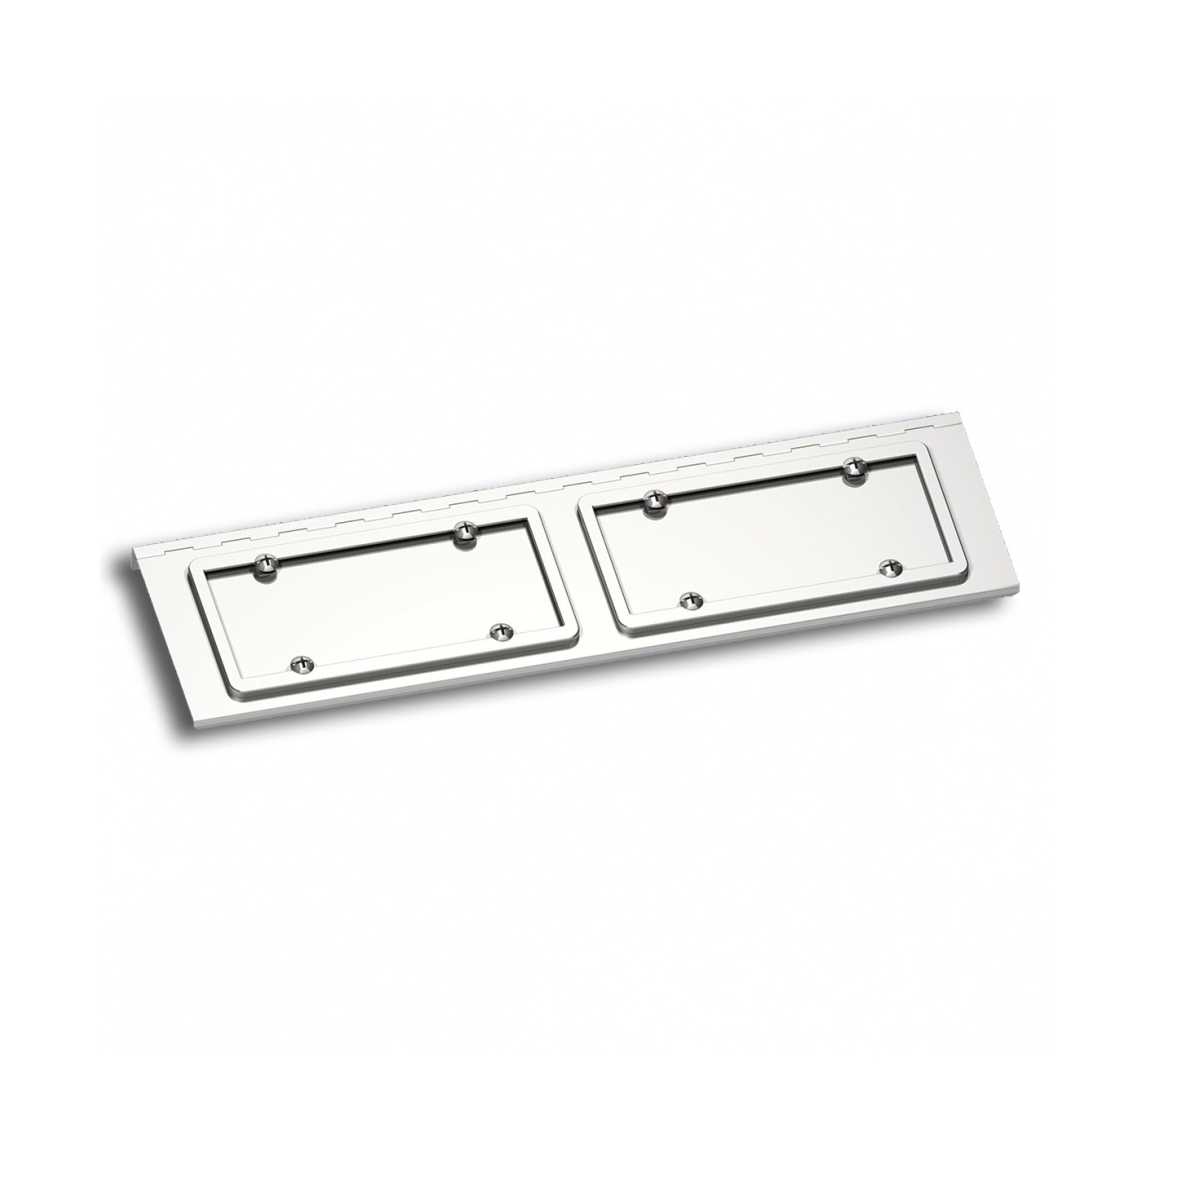 Dual License Swing Plate for Peterbilt - Polished Stainless Steel